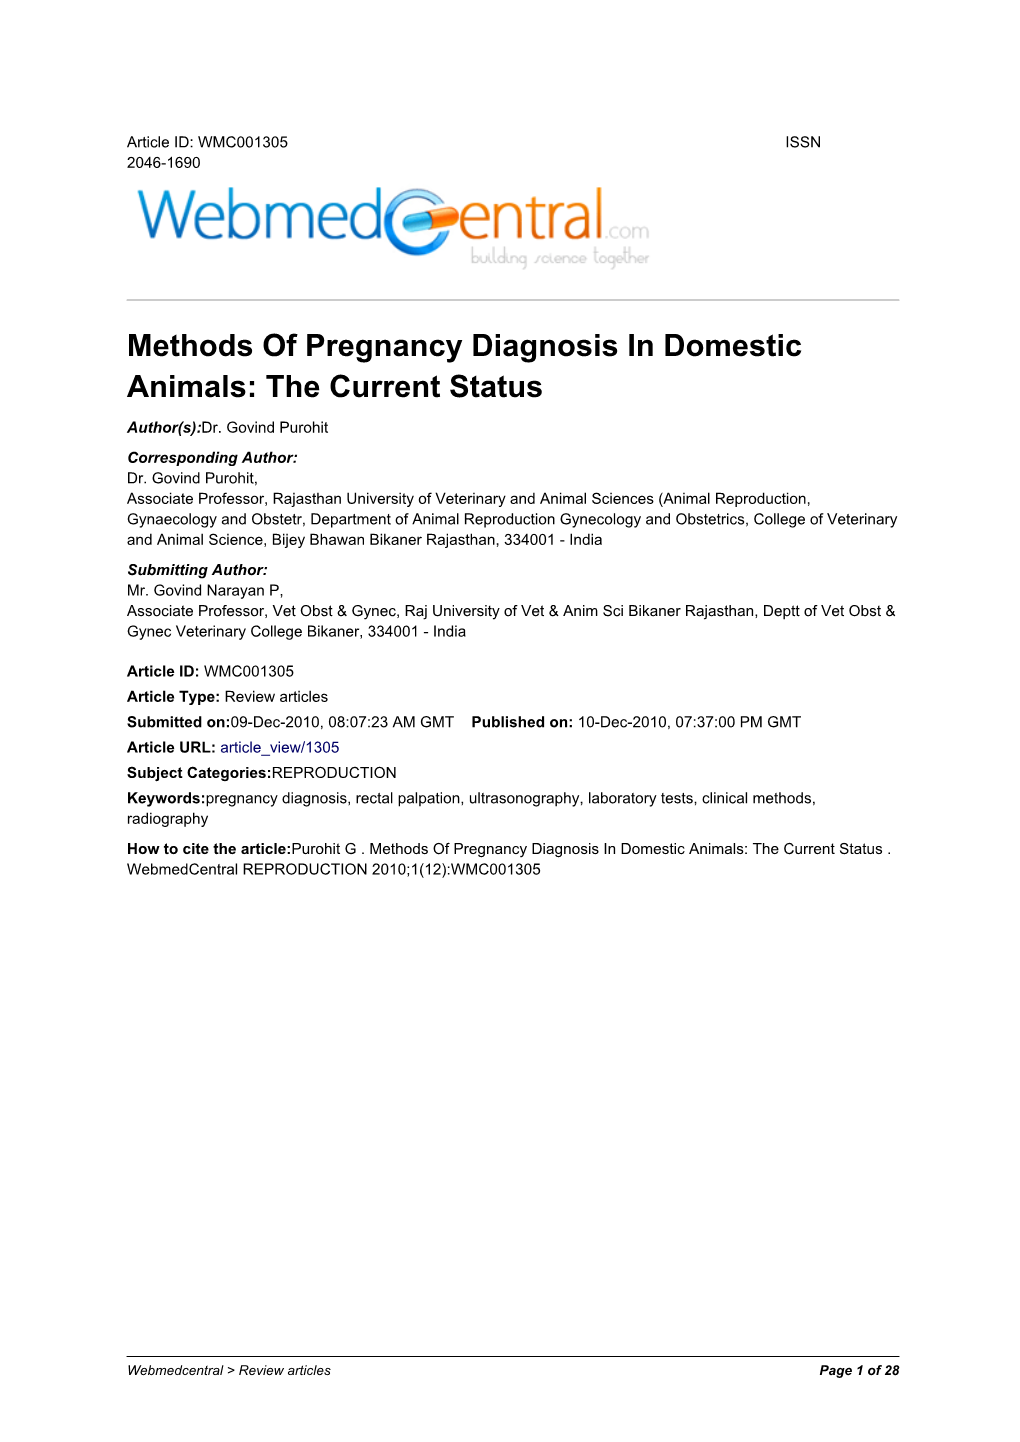 Methods of Pregnancy Diagnosis in Domestic Animals: the Current Status